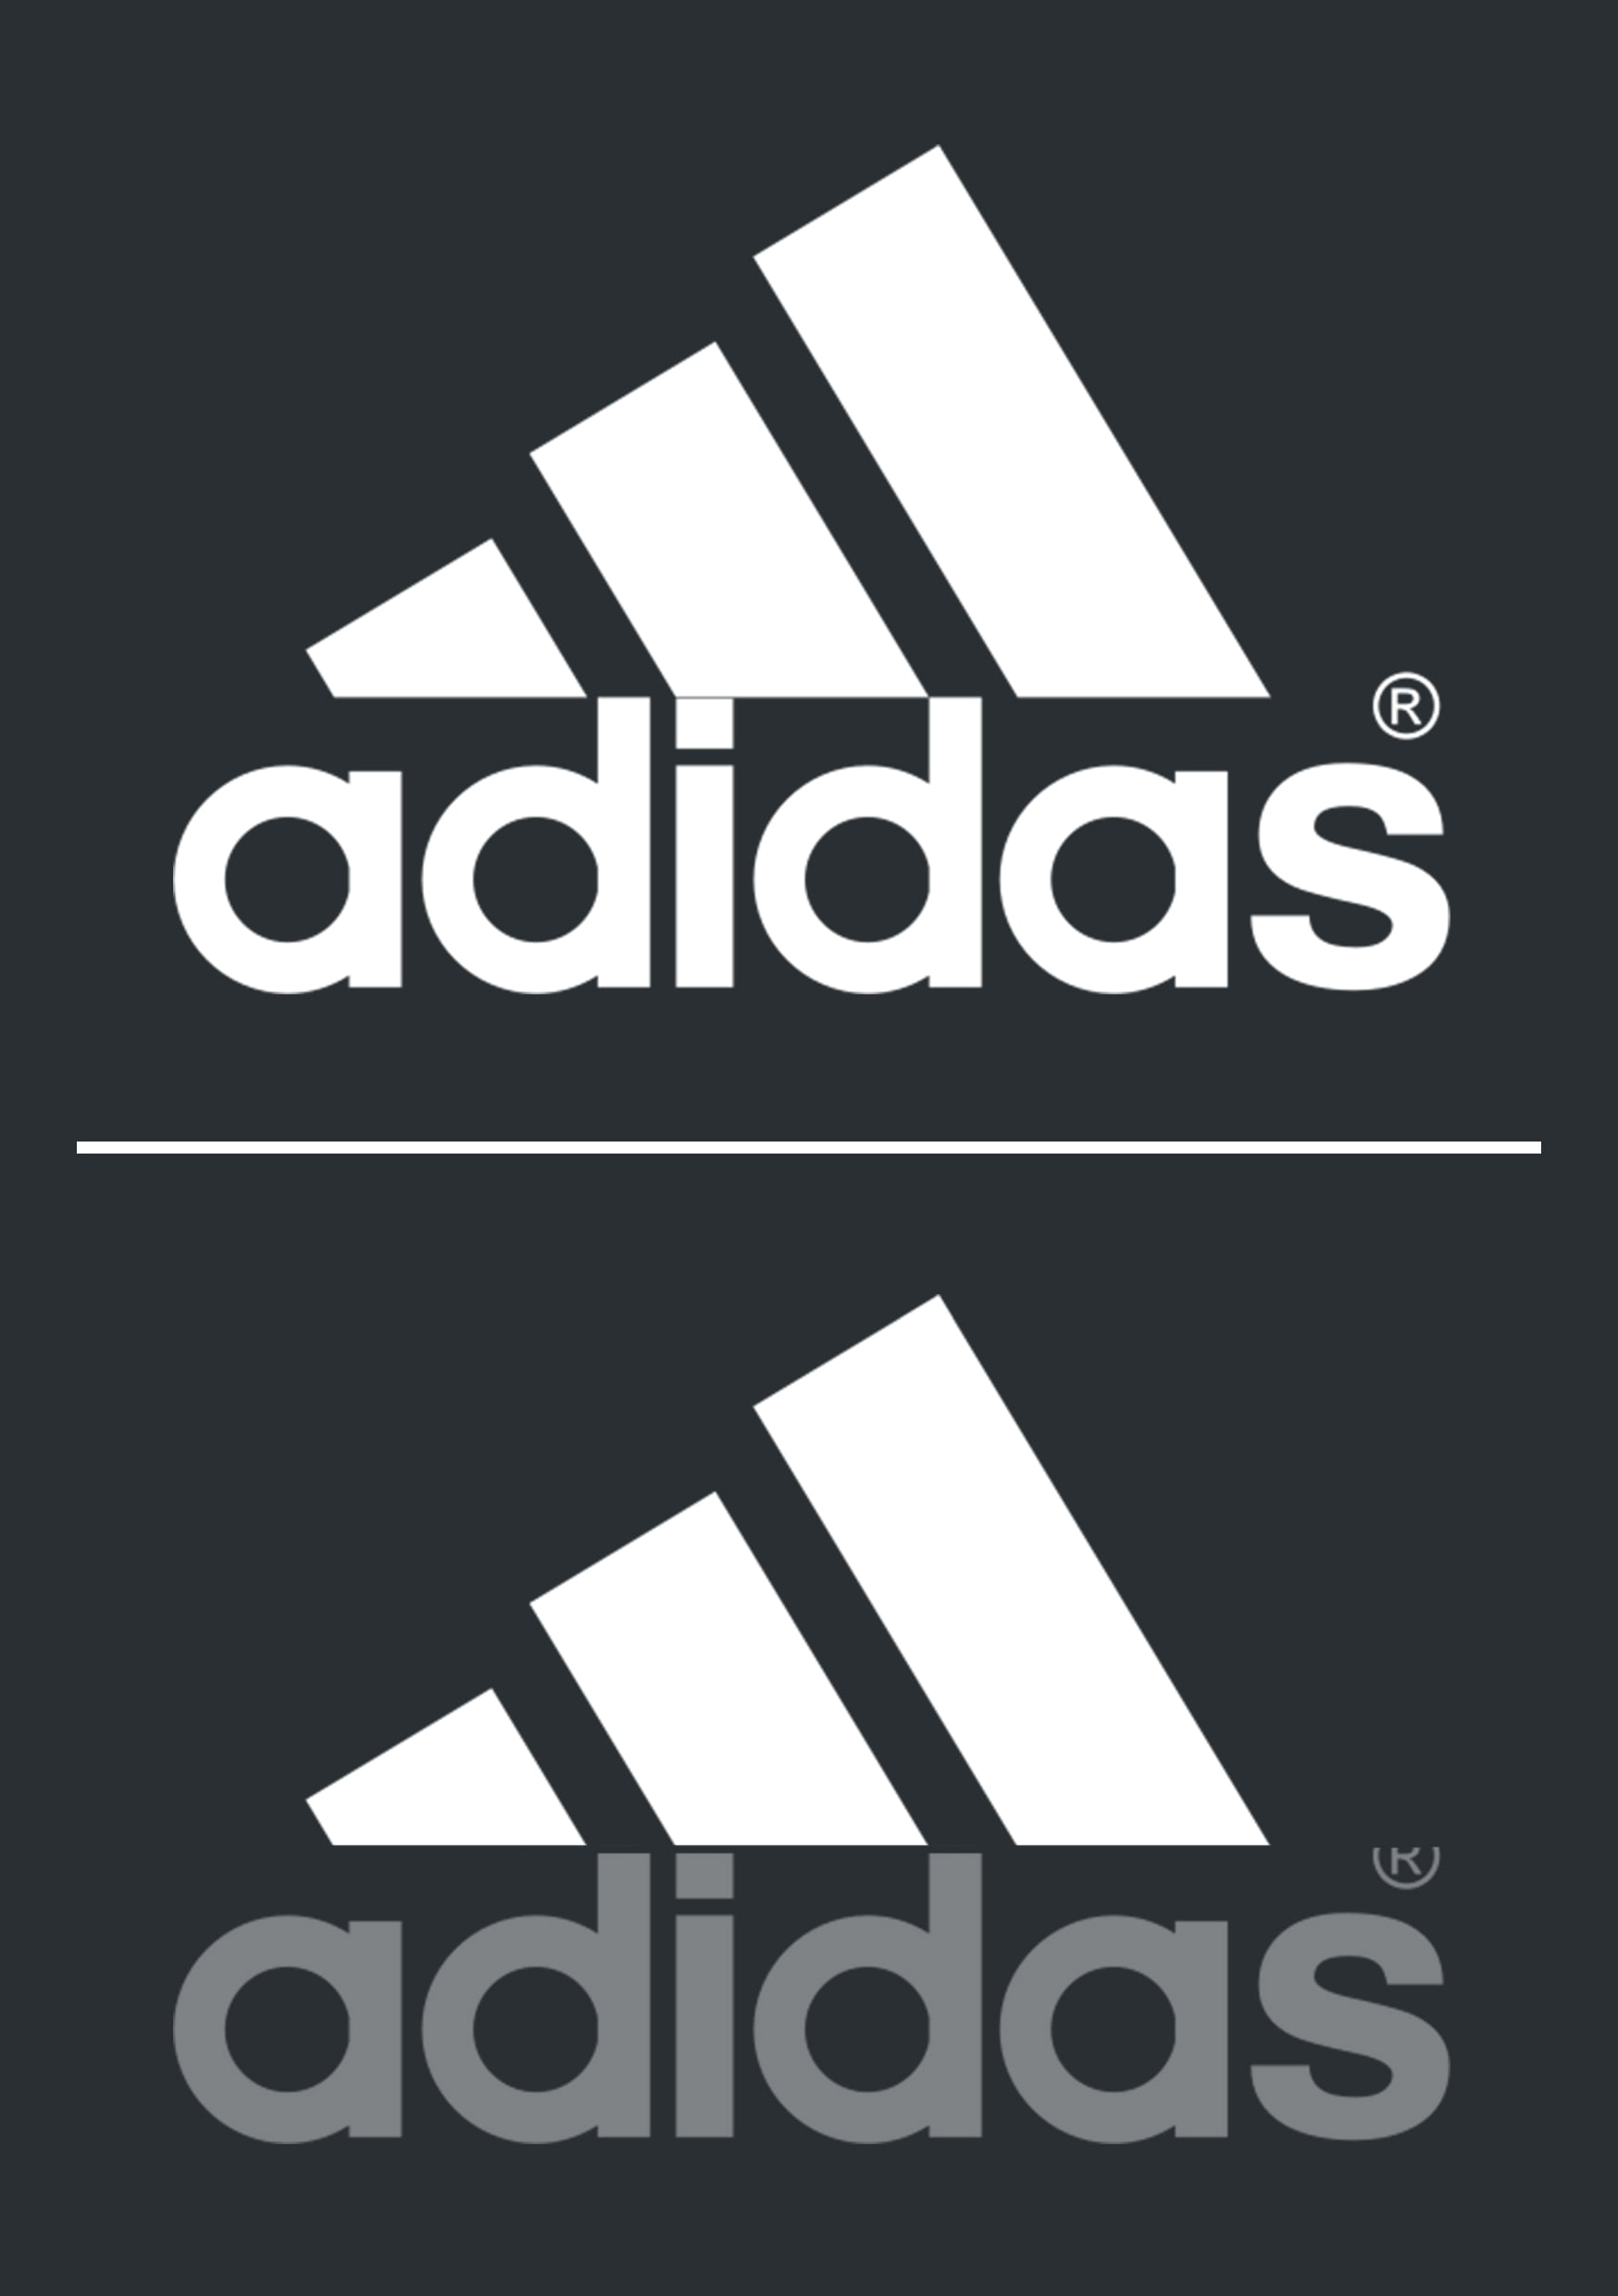 the meaning of adidas logo